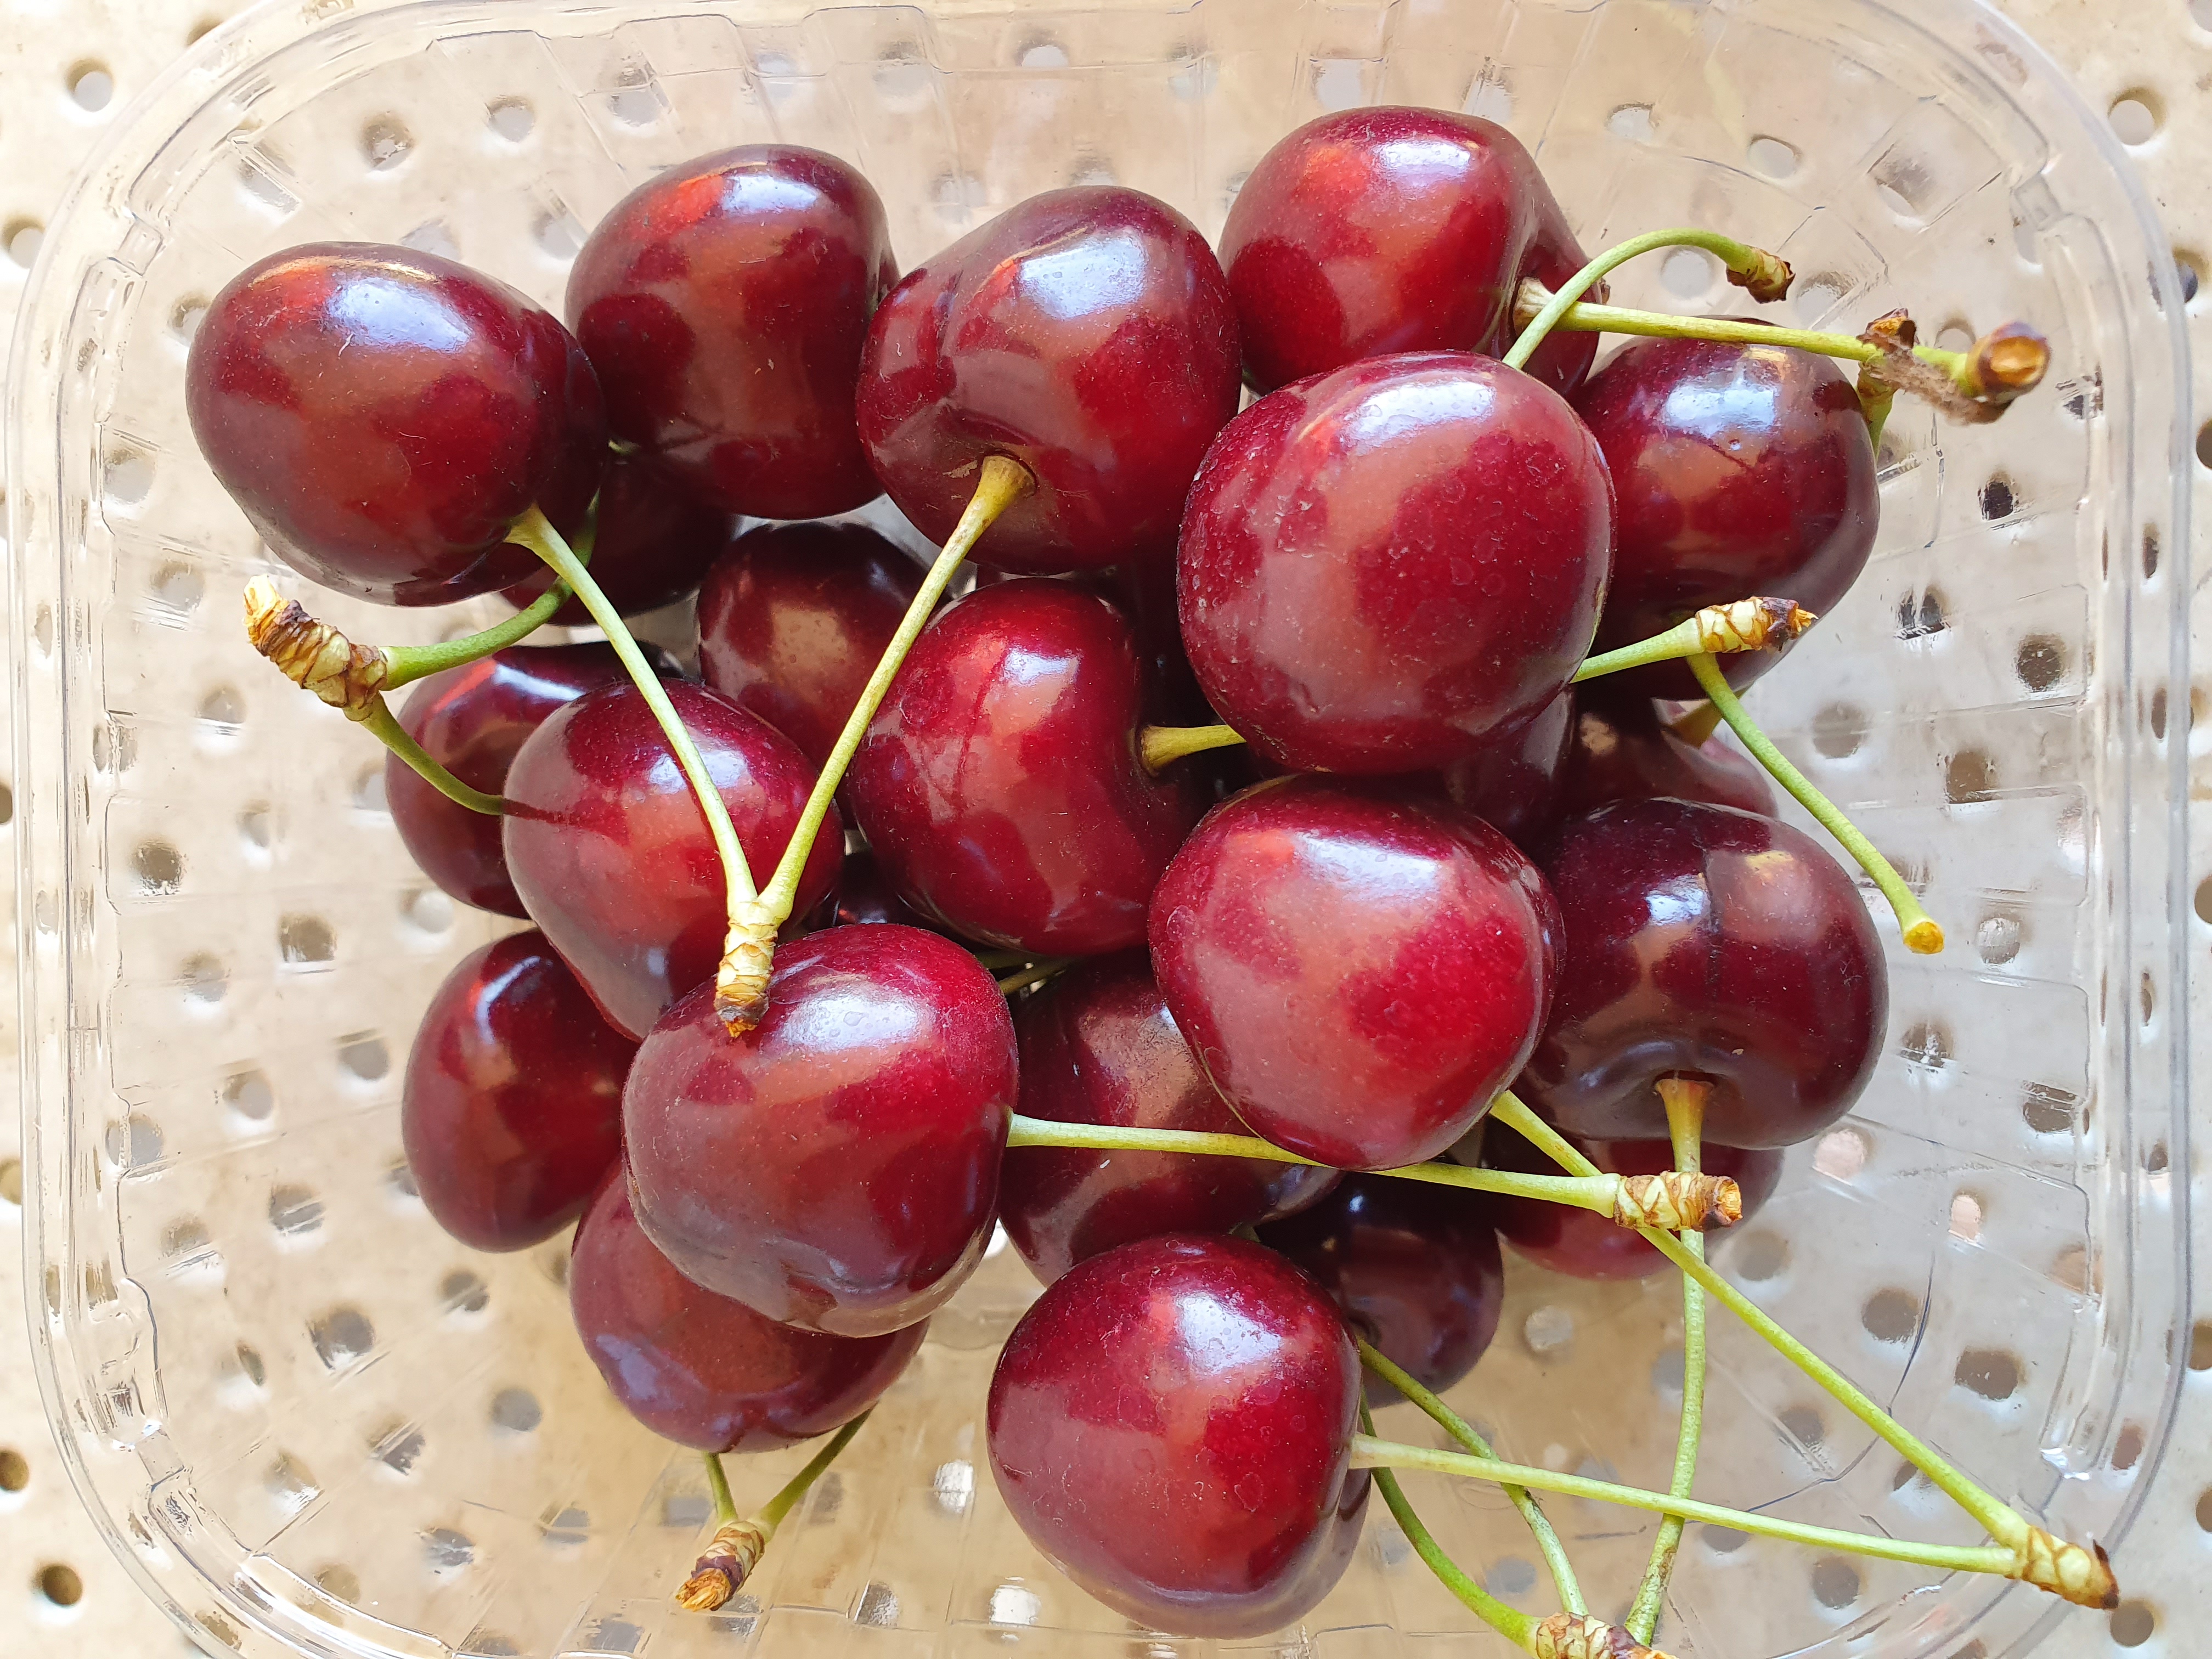 The influence of cultivar and rootstock on the bioactive compound content in sweet cherry